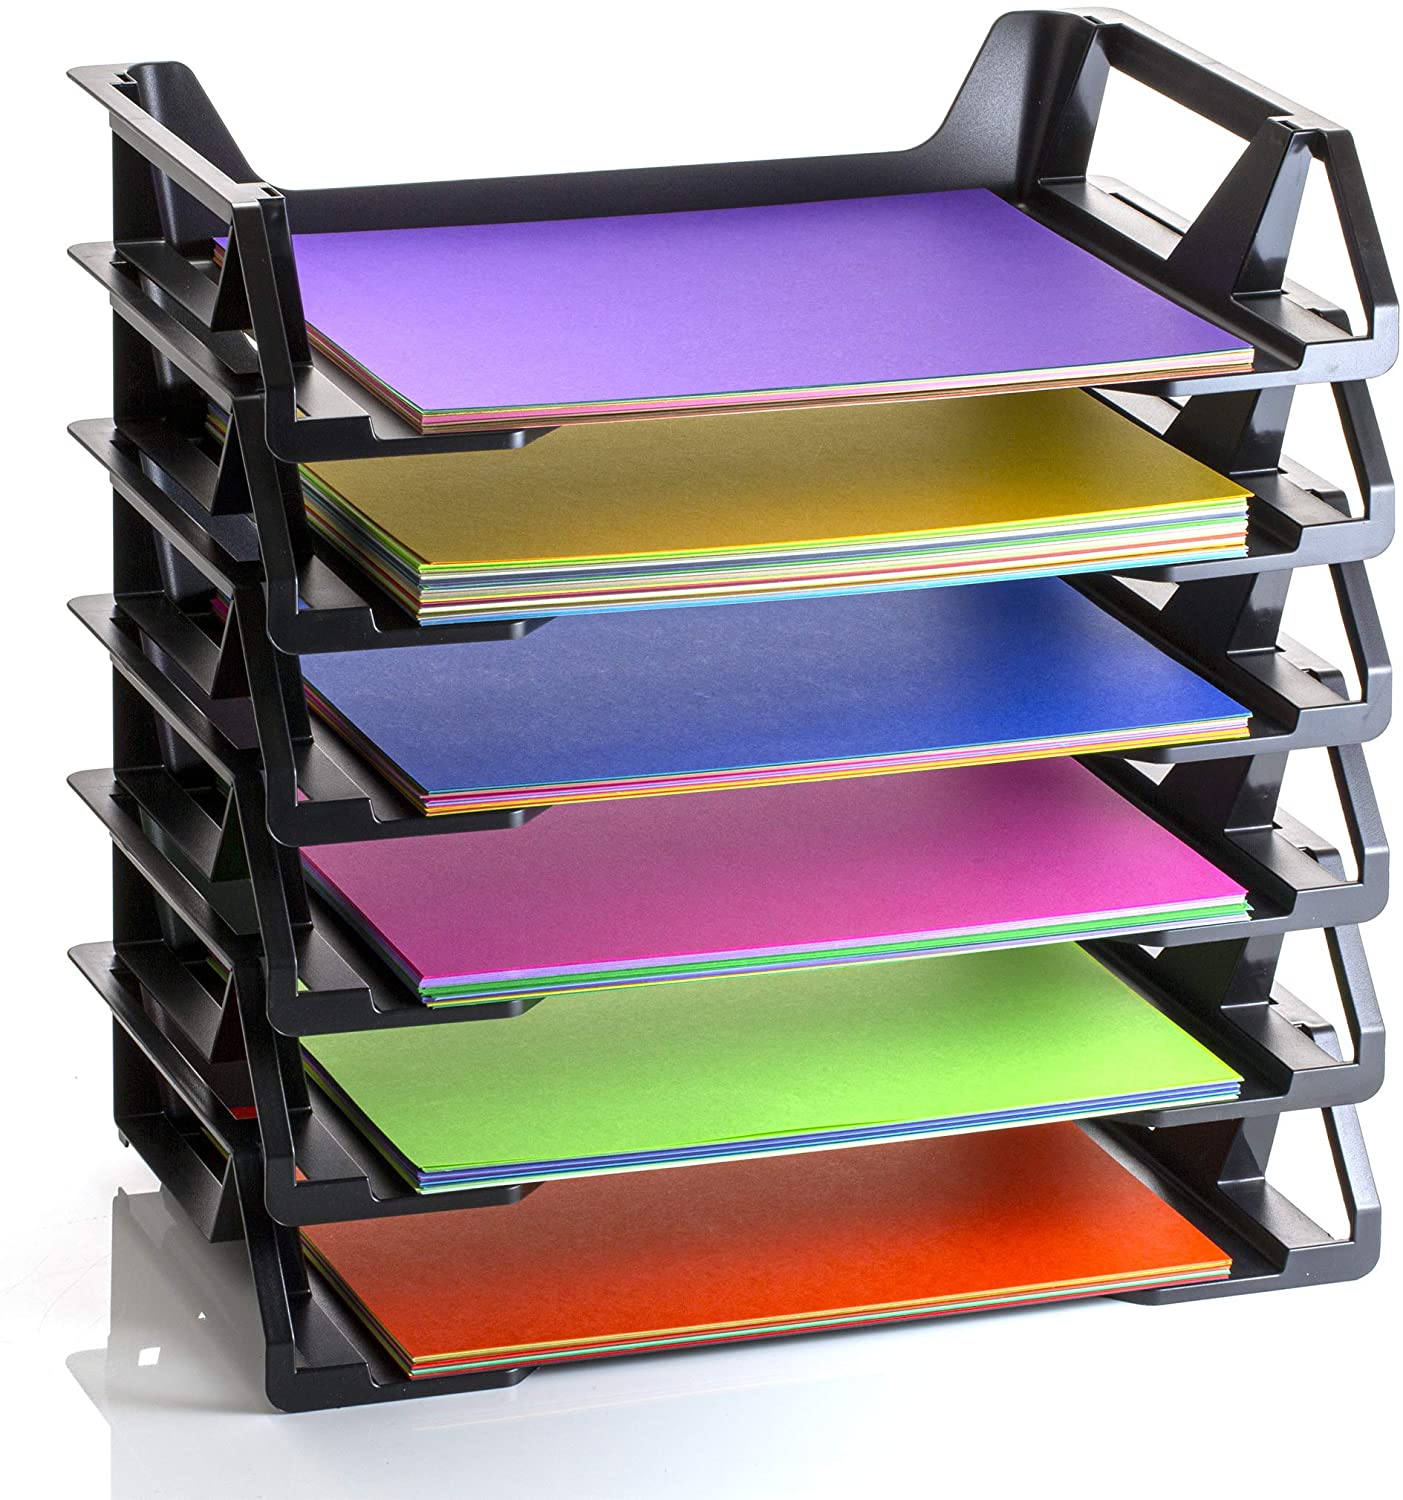 A paper sorter is a great way to organize your colored construction paper in your classroom. This makes it easy for students to independently grab the paper they need for their activities.